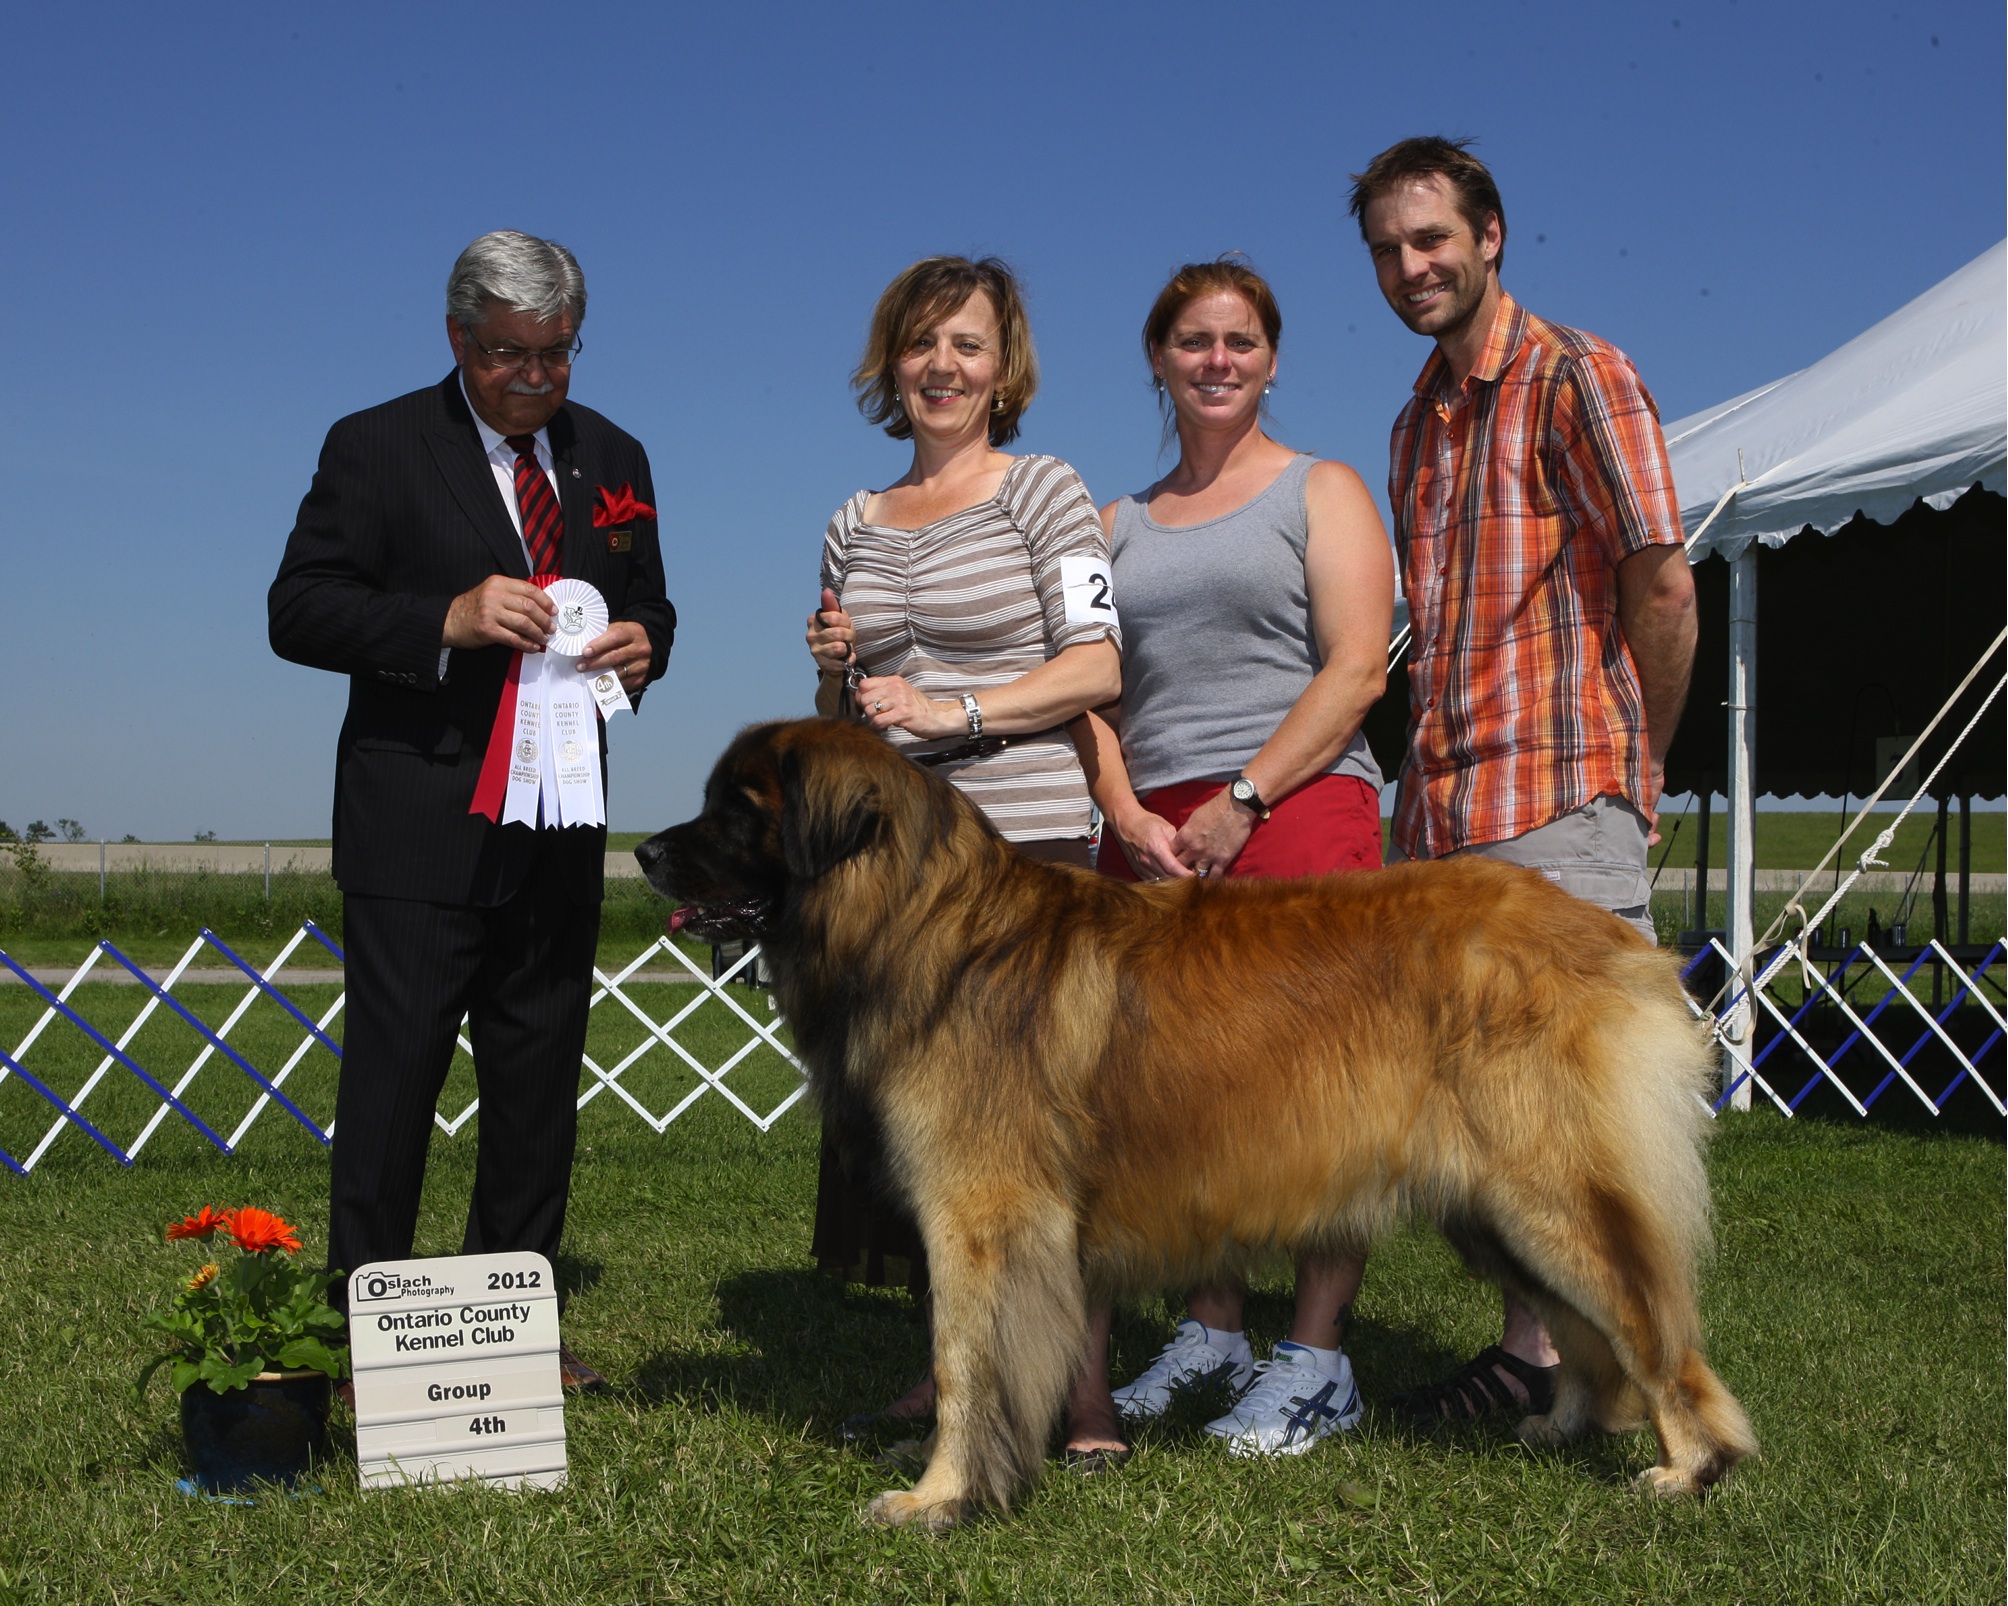 group4th — Leonberger Club of Canada